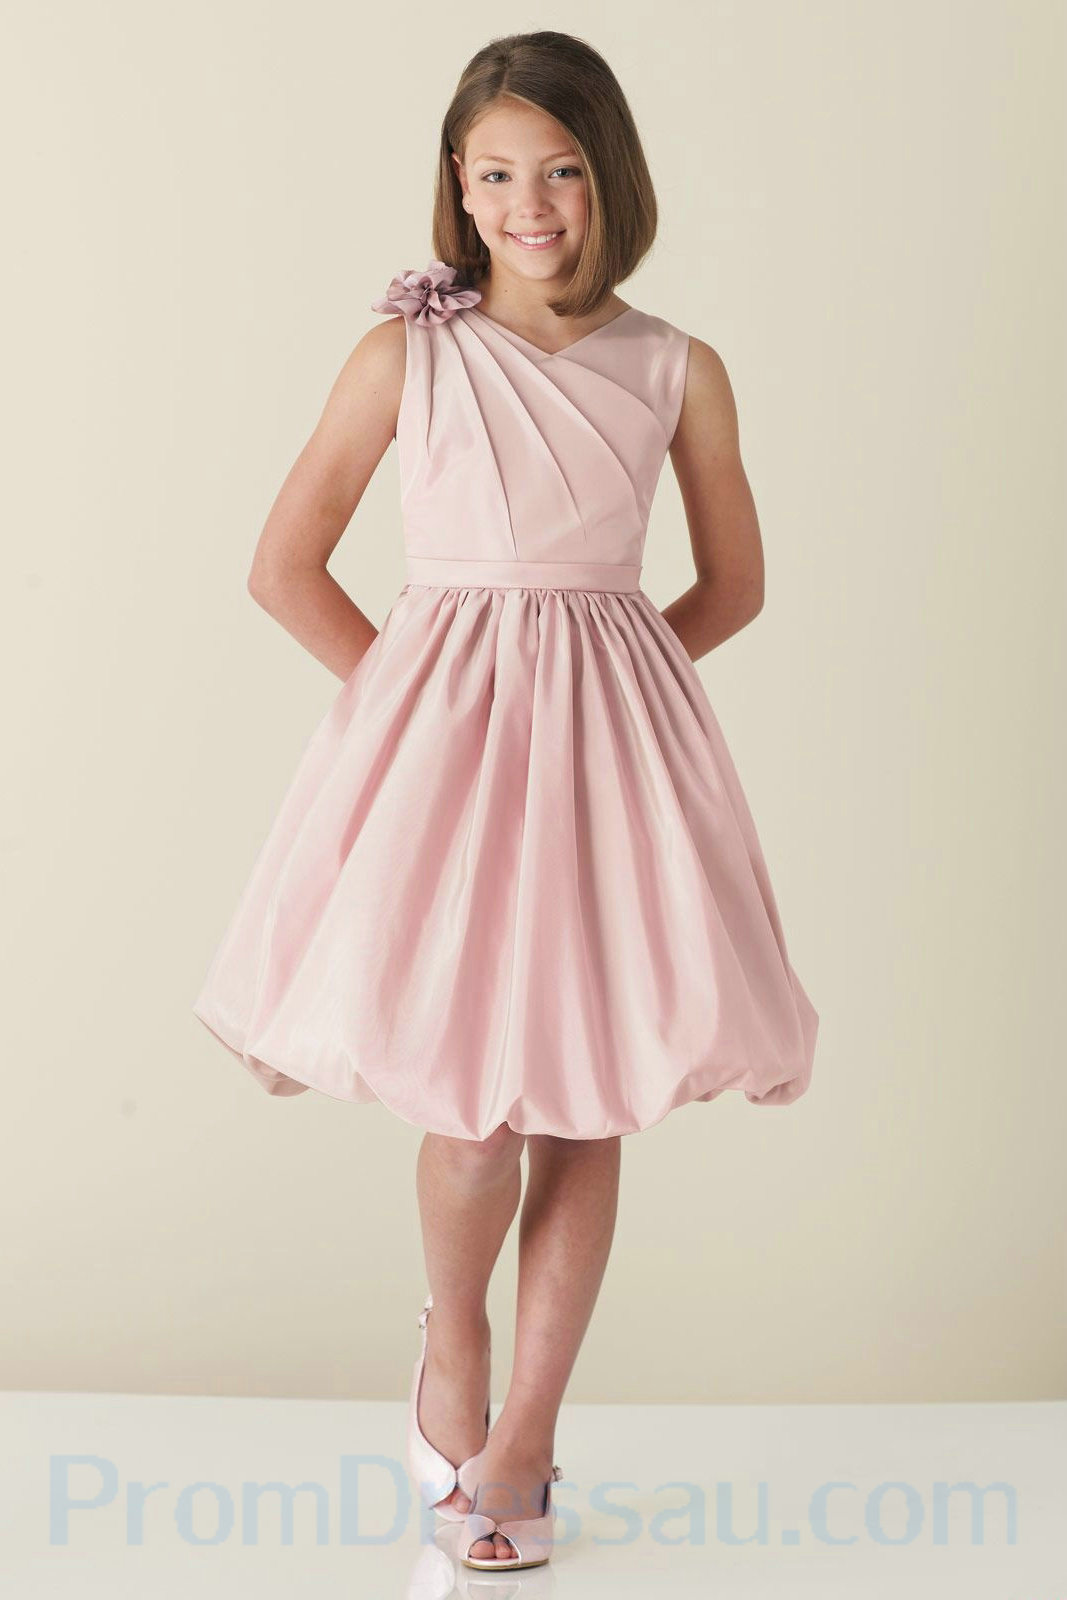 Young Girls In Short Dresses : Simple Guide To Choosing